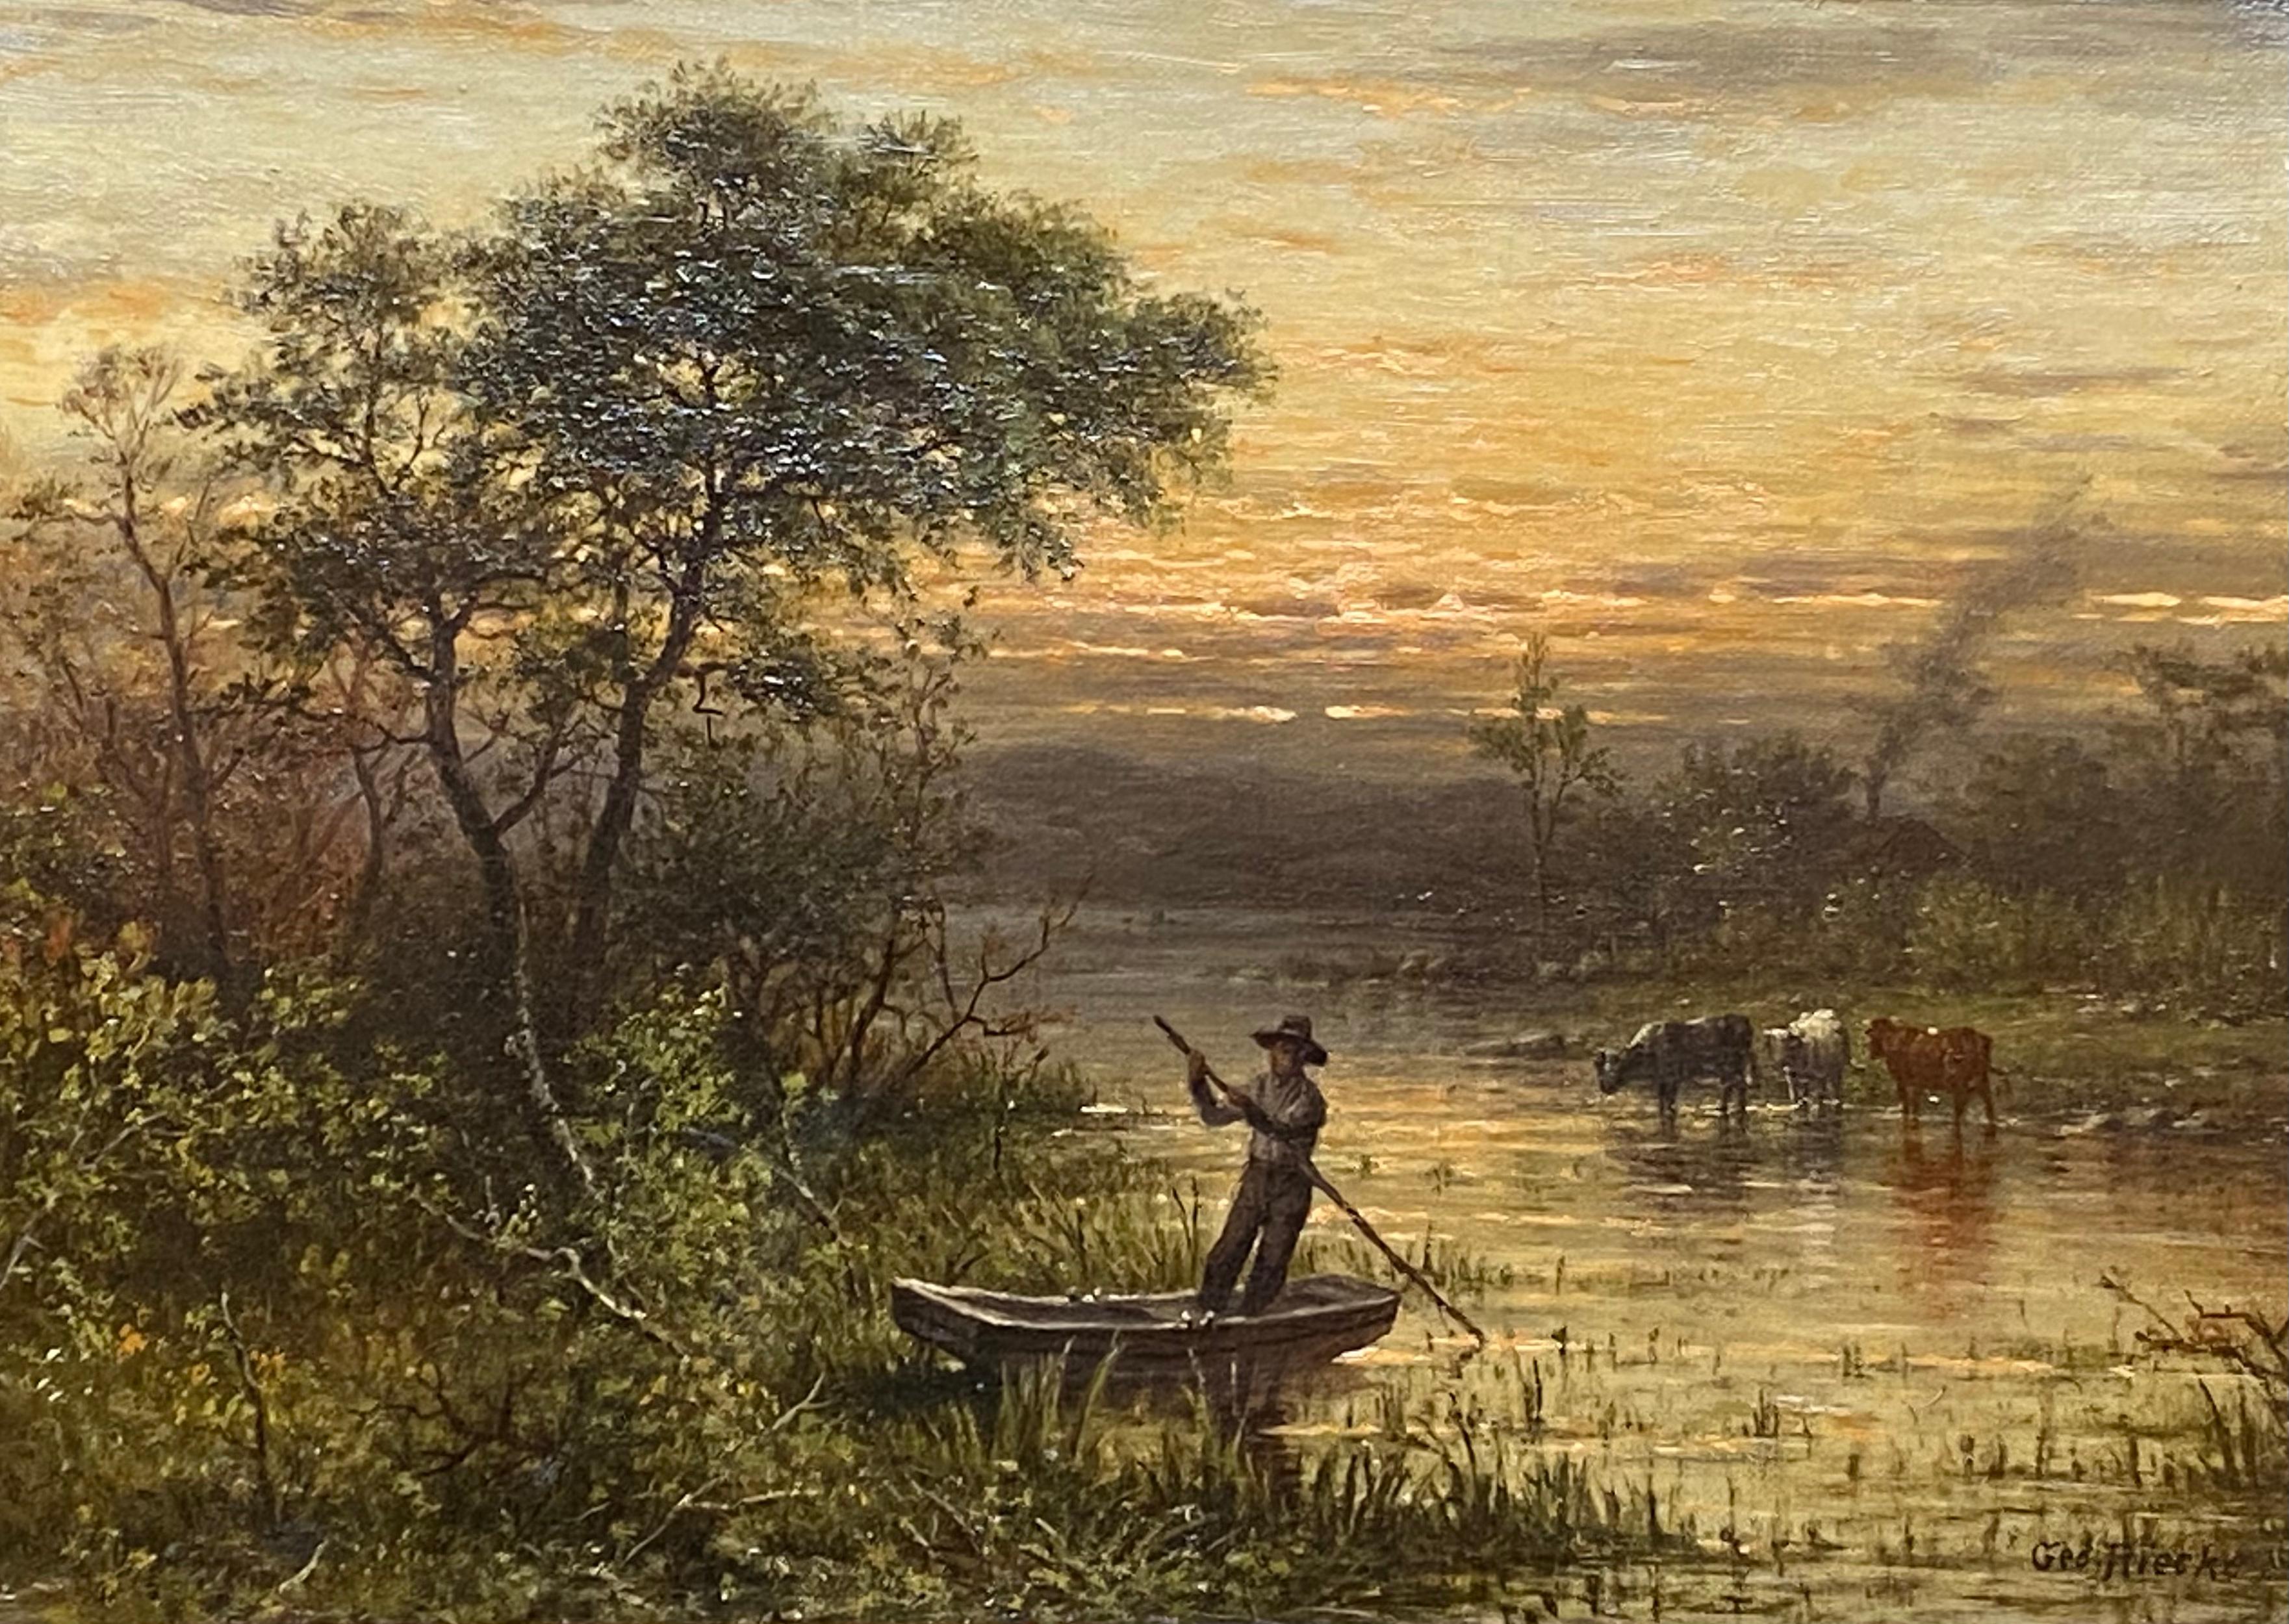 “Sunset on the River” - Painting by George Riecke